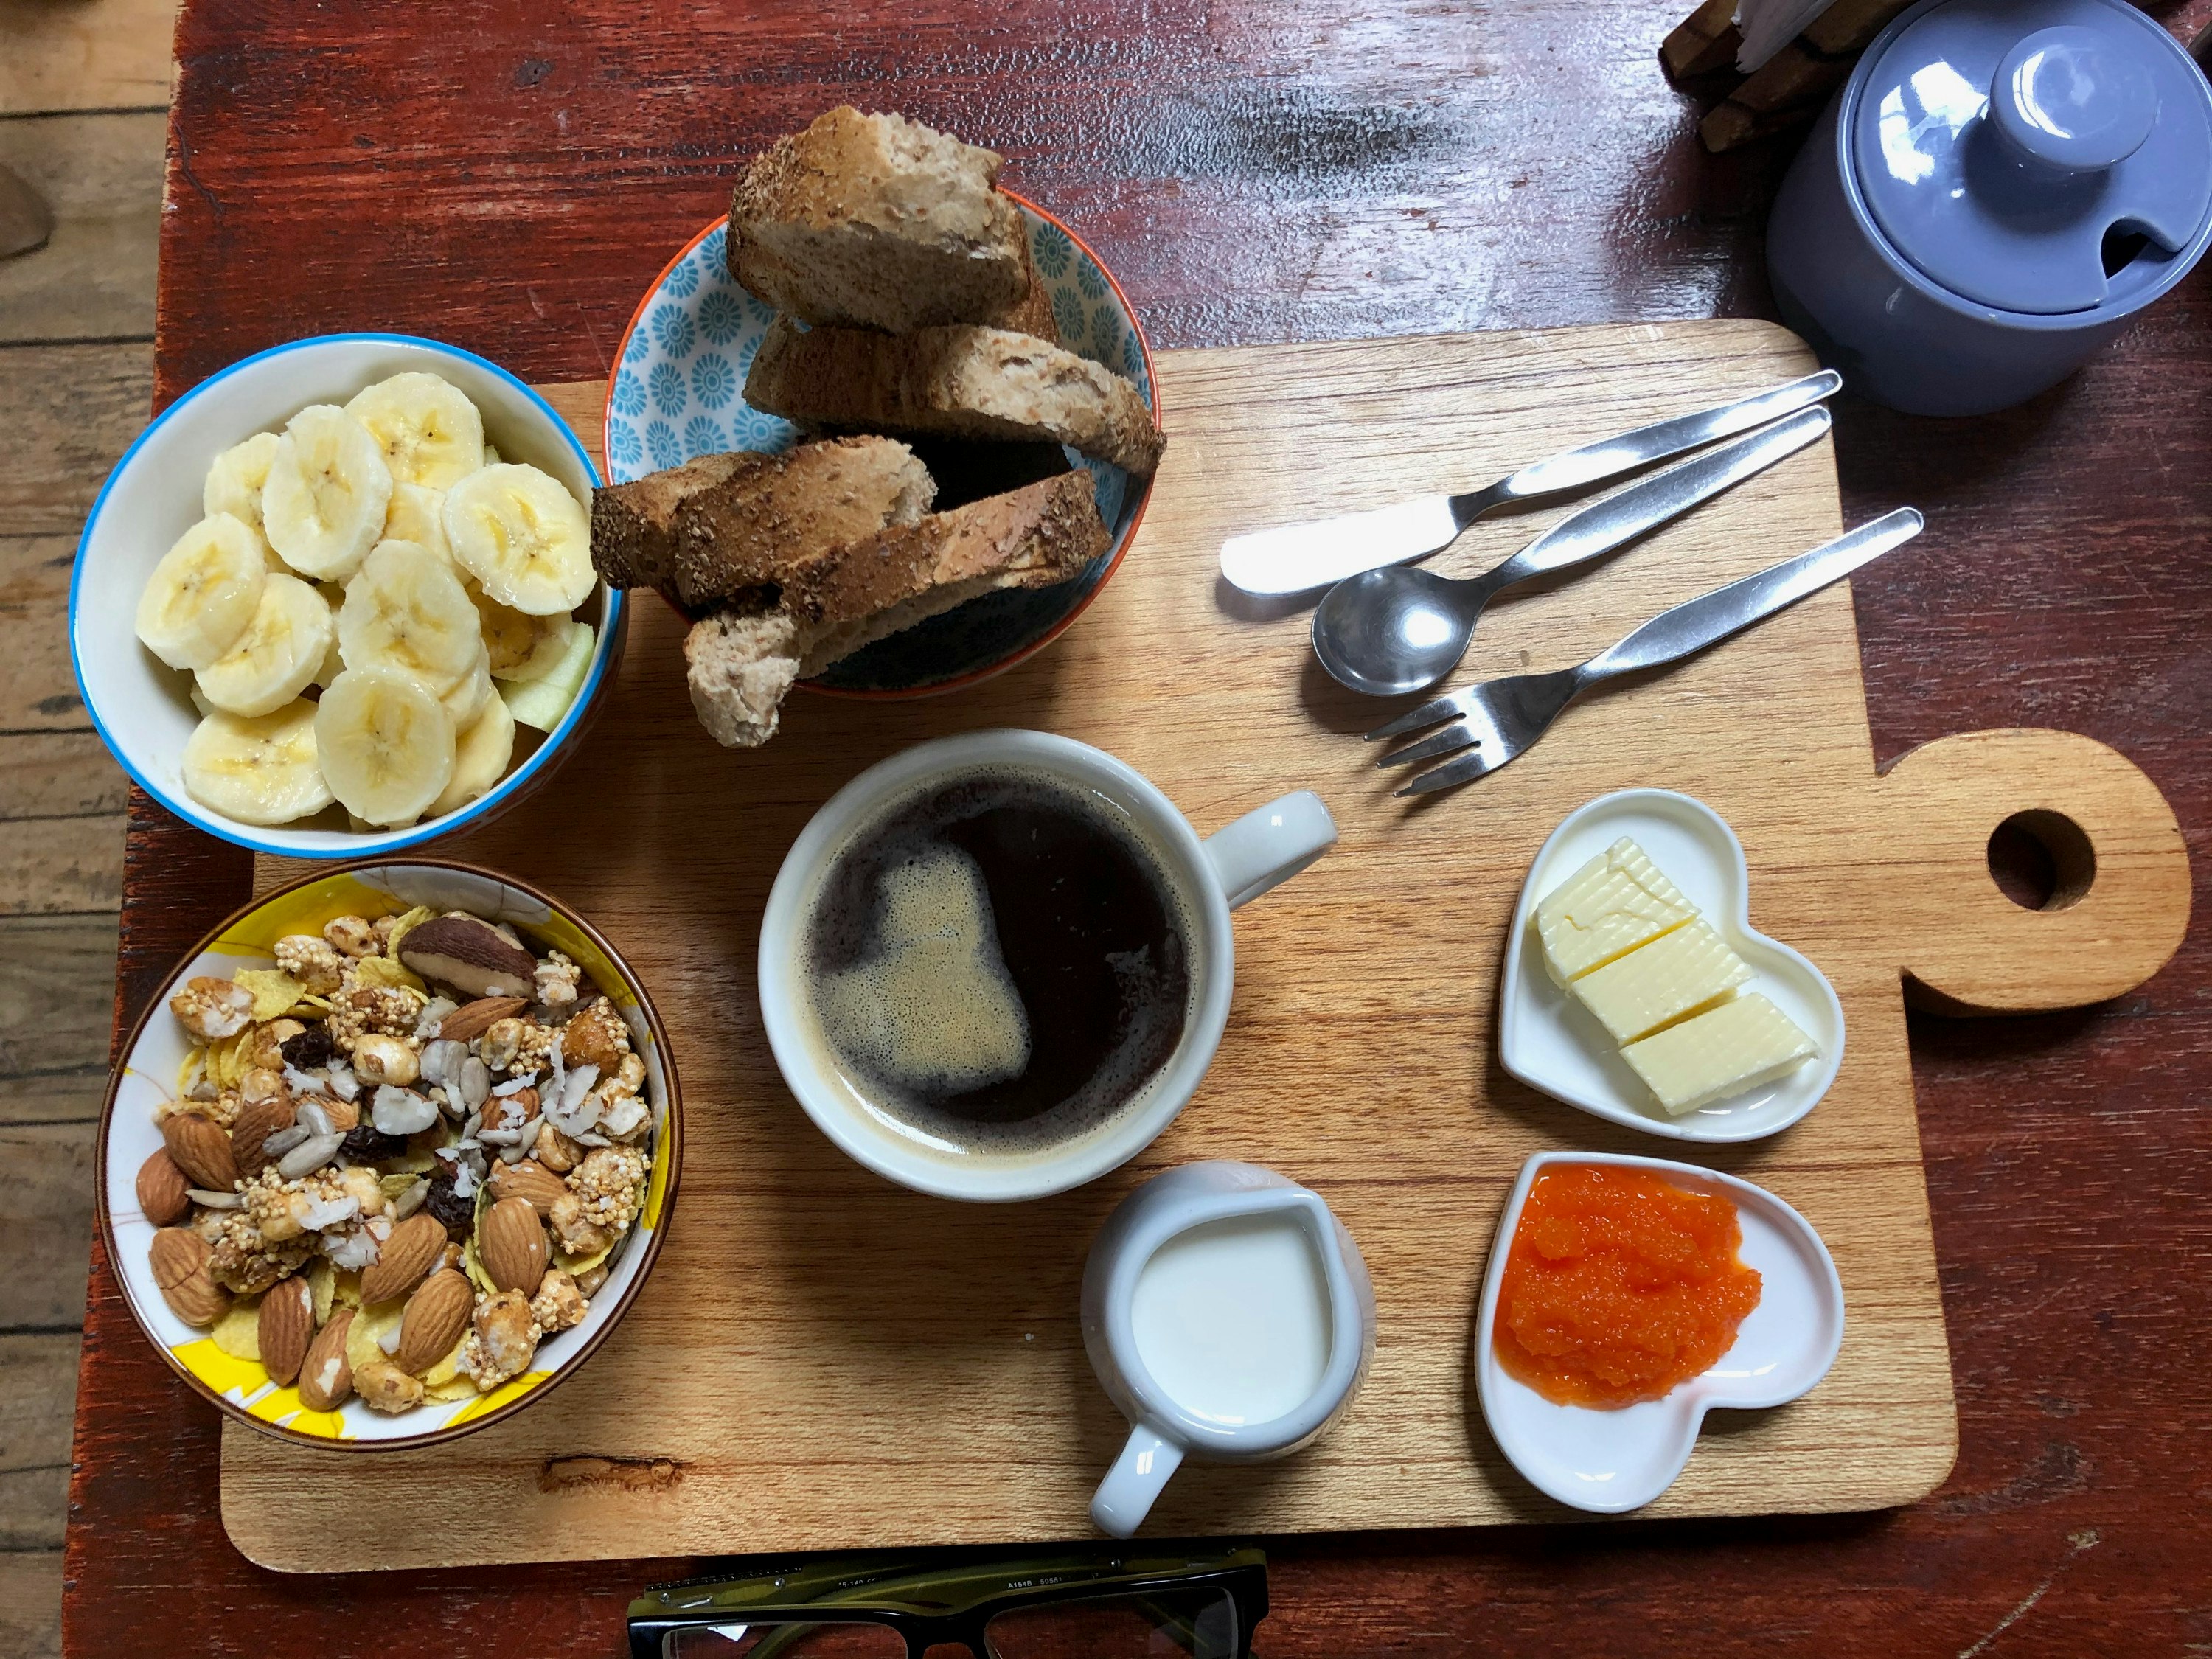 Bananas, bread, coffee, granola, butter and jam on a wooden slate.